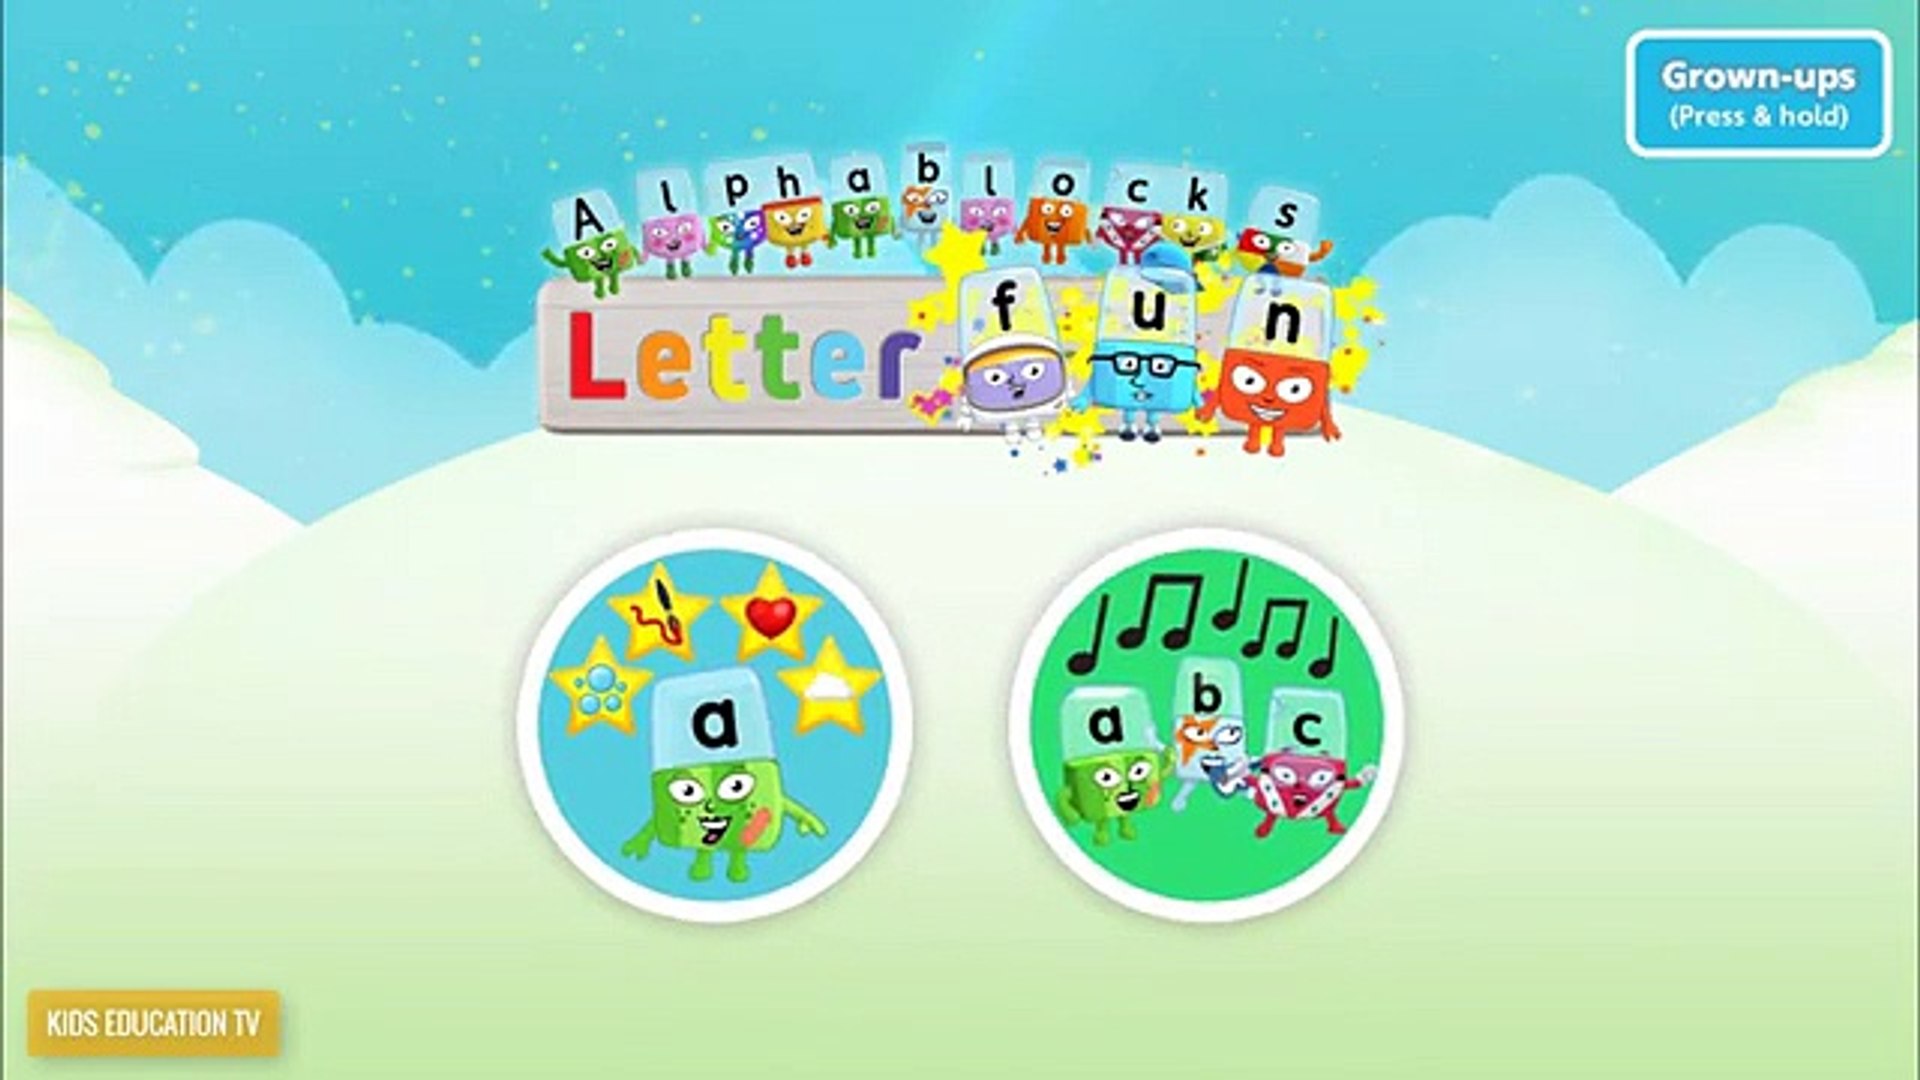 ⁣Learn to Read|Phonics for Kids|The letter|Alpha blocks|Letter Fun #02